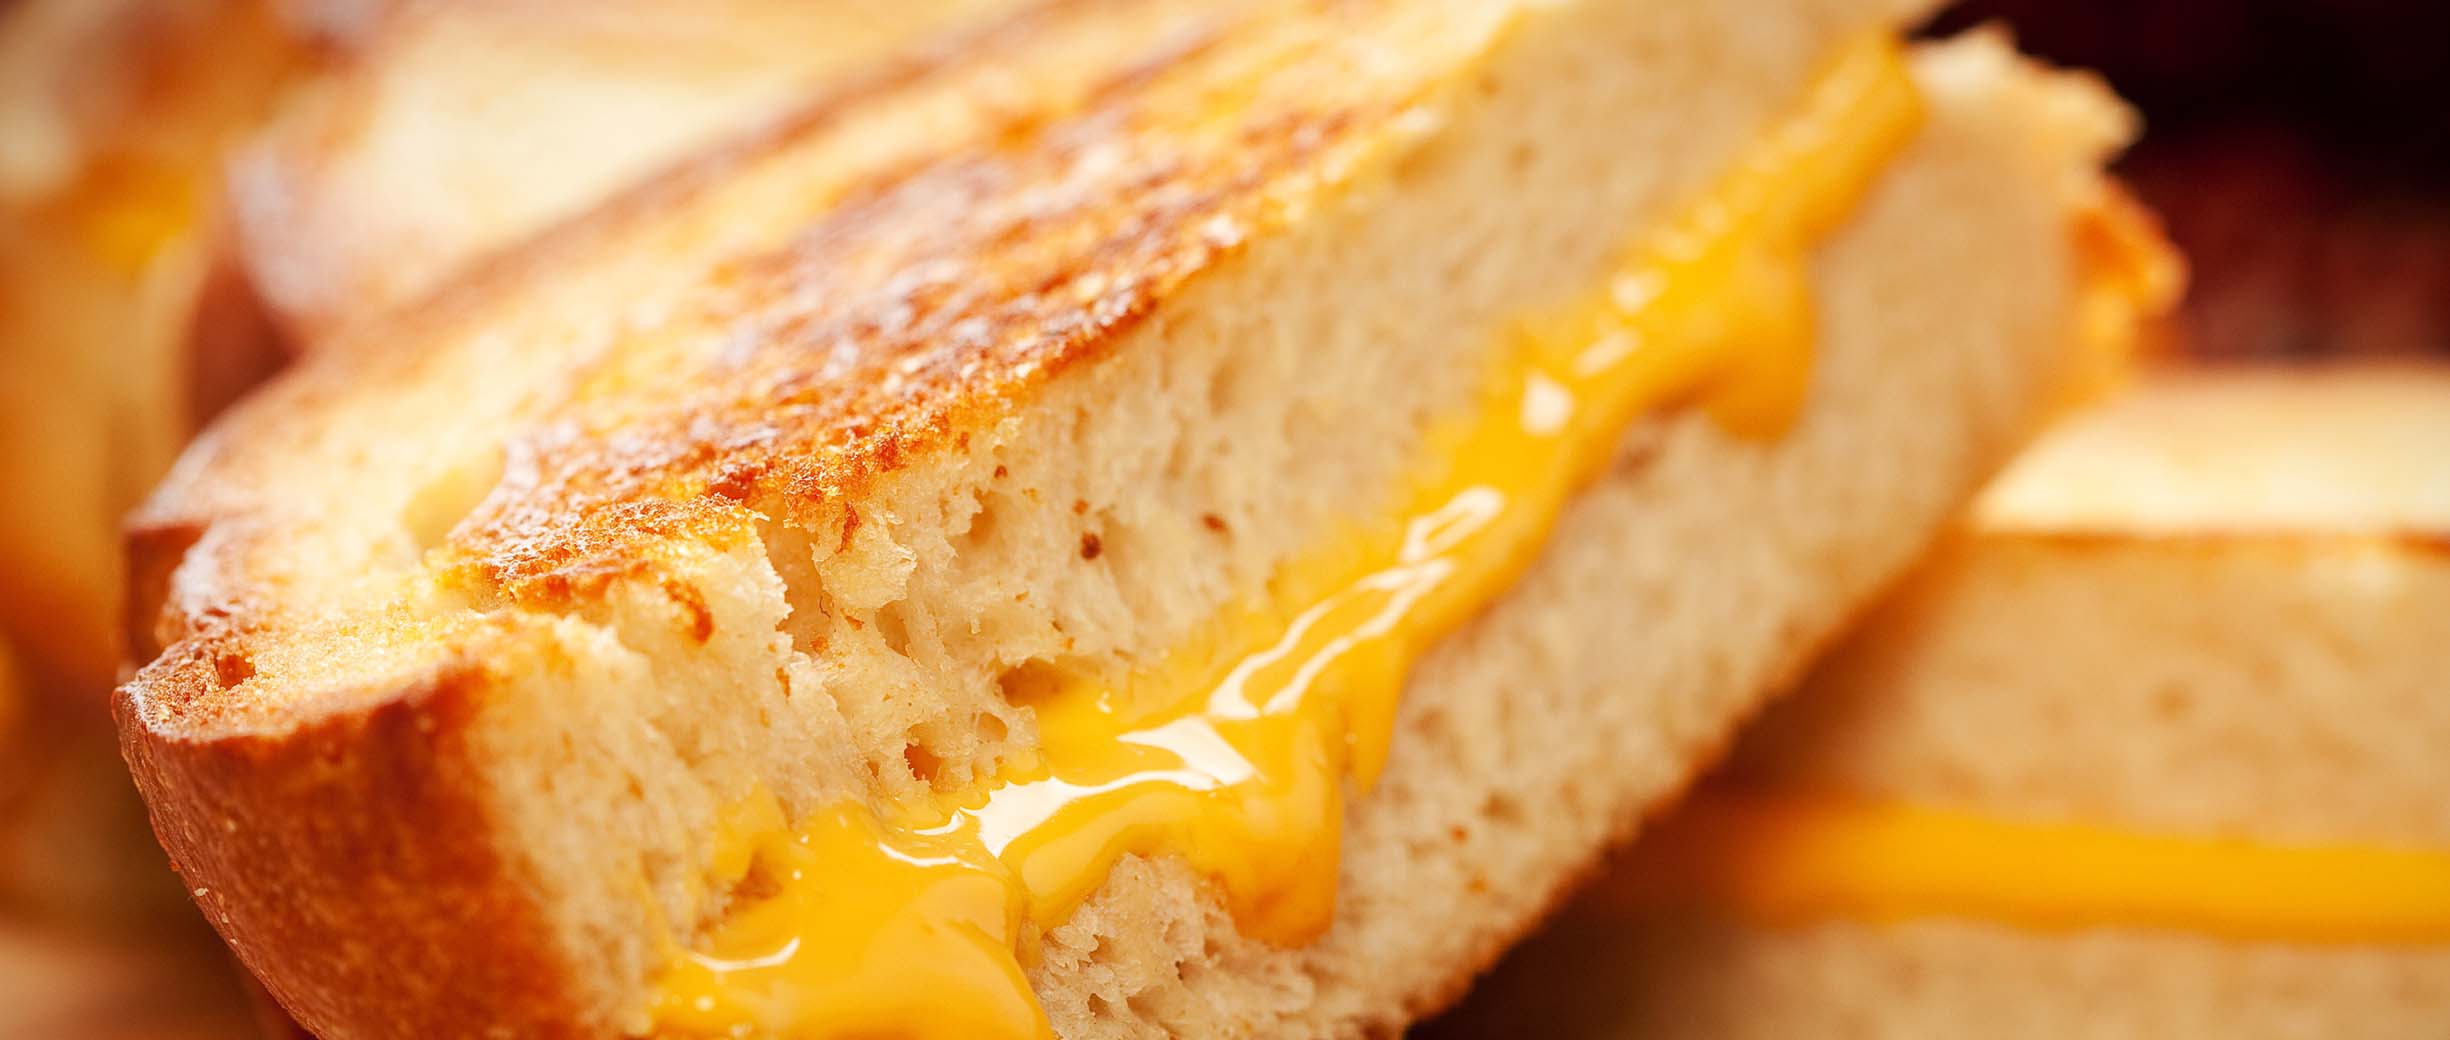 5 Tricks to Make the Creamiest, Crunchiest Grilled Cheese in Town